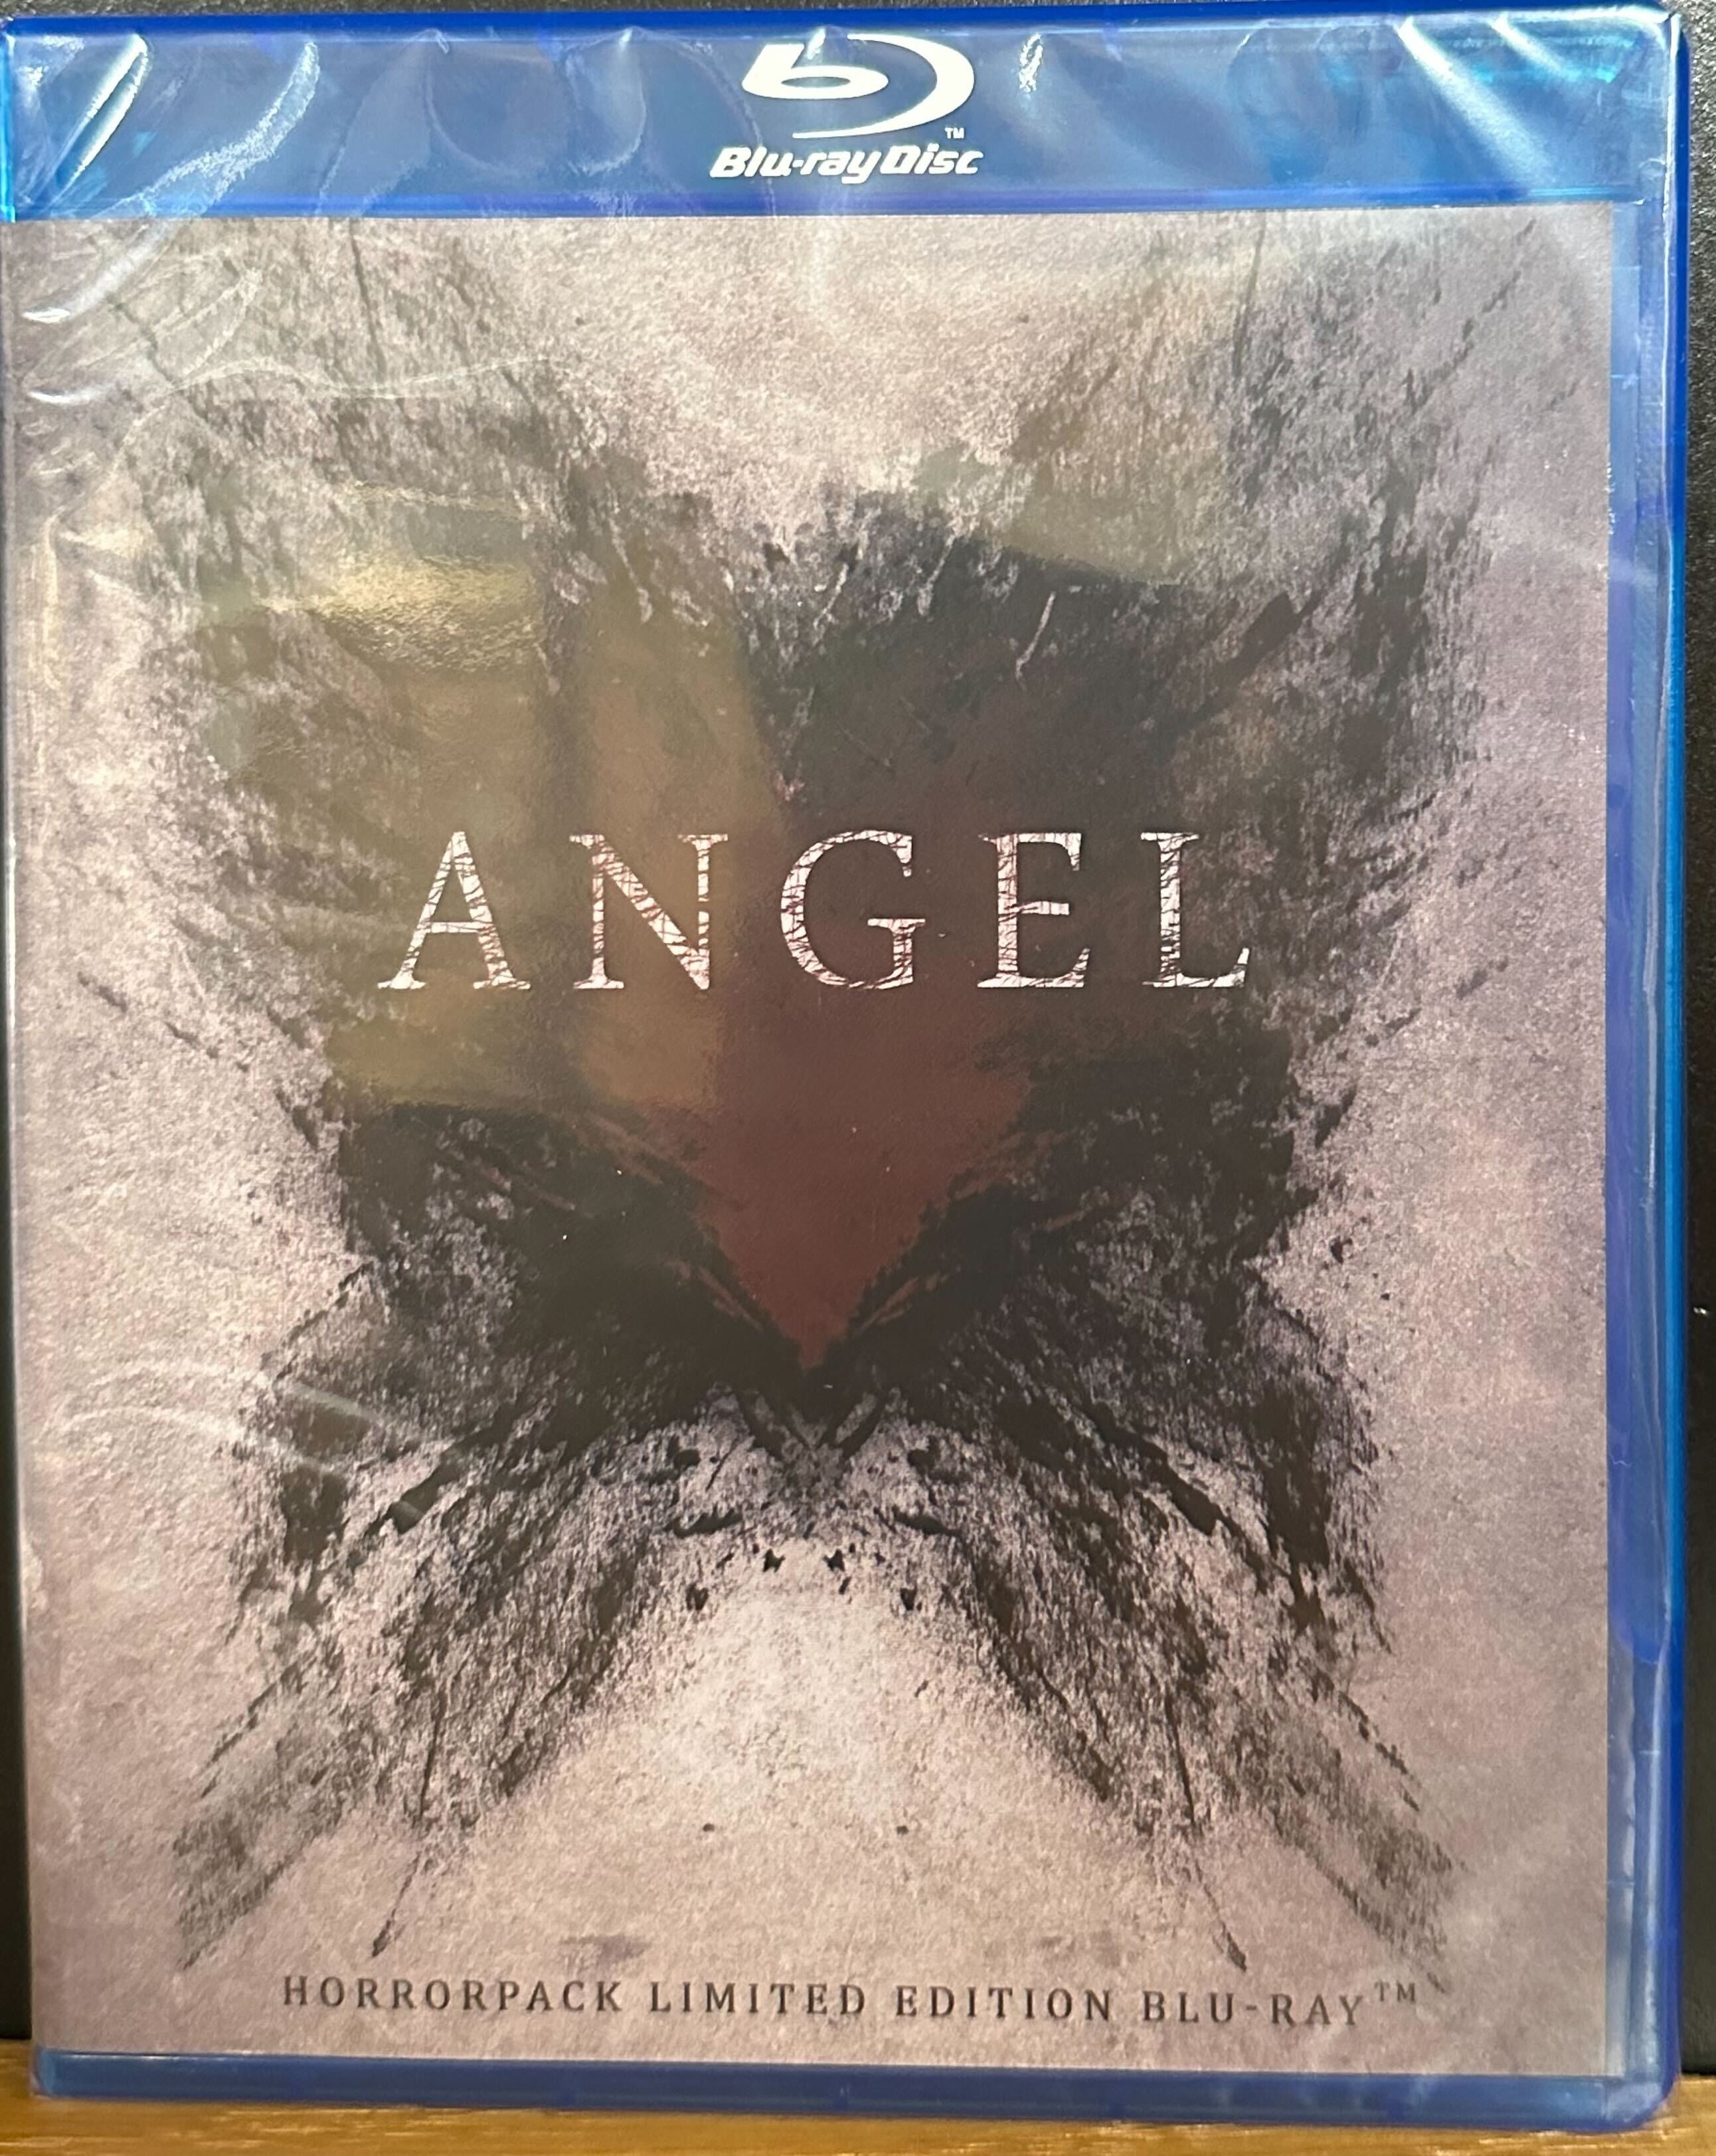 Angel - HorrorPack Limited Edition Blu-ray #81